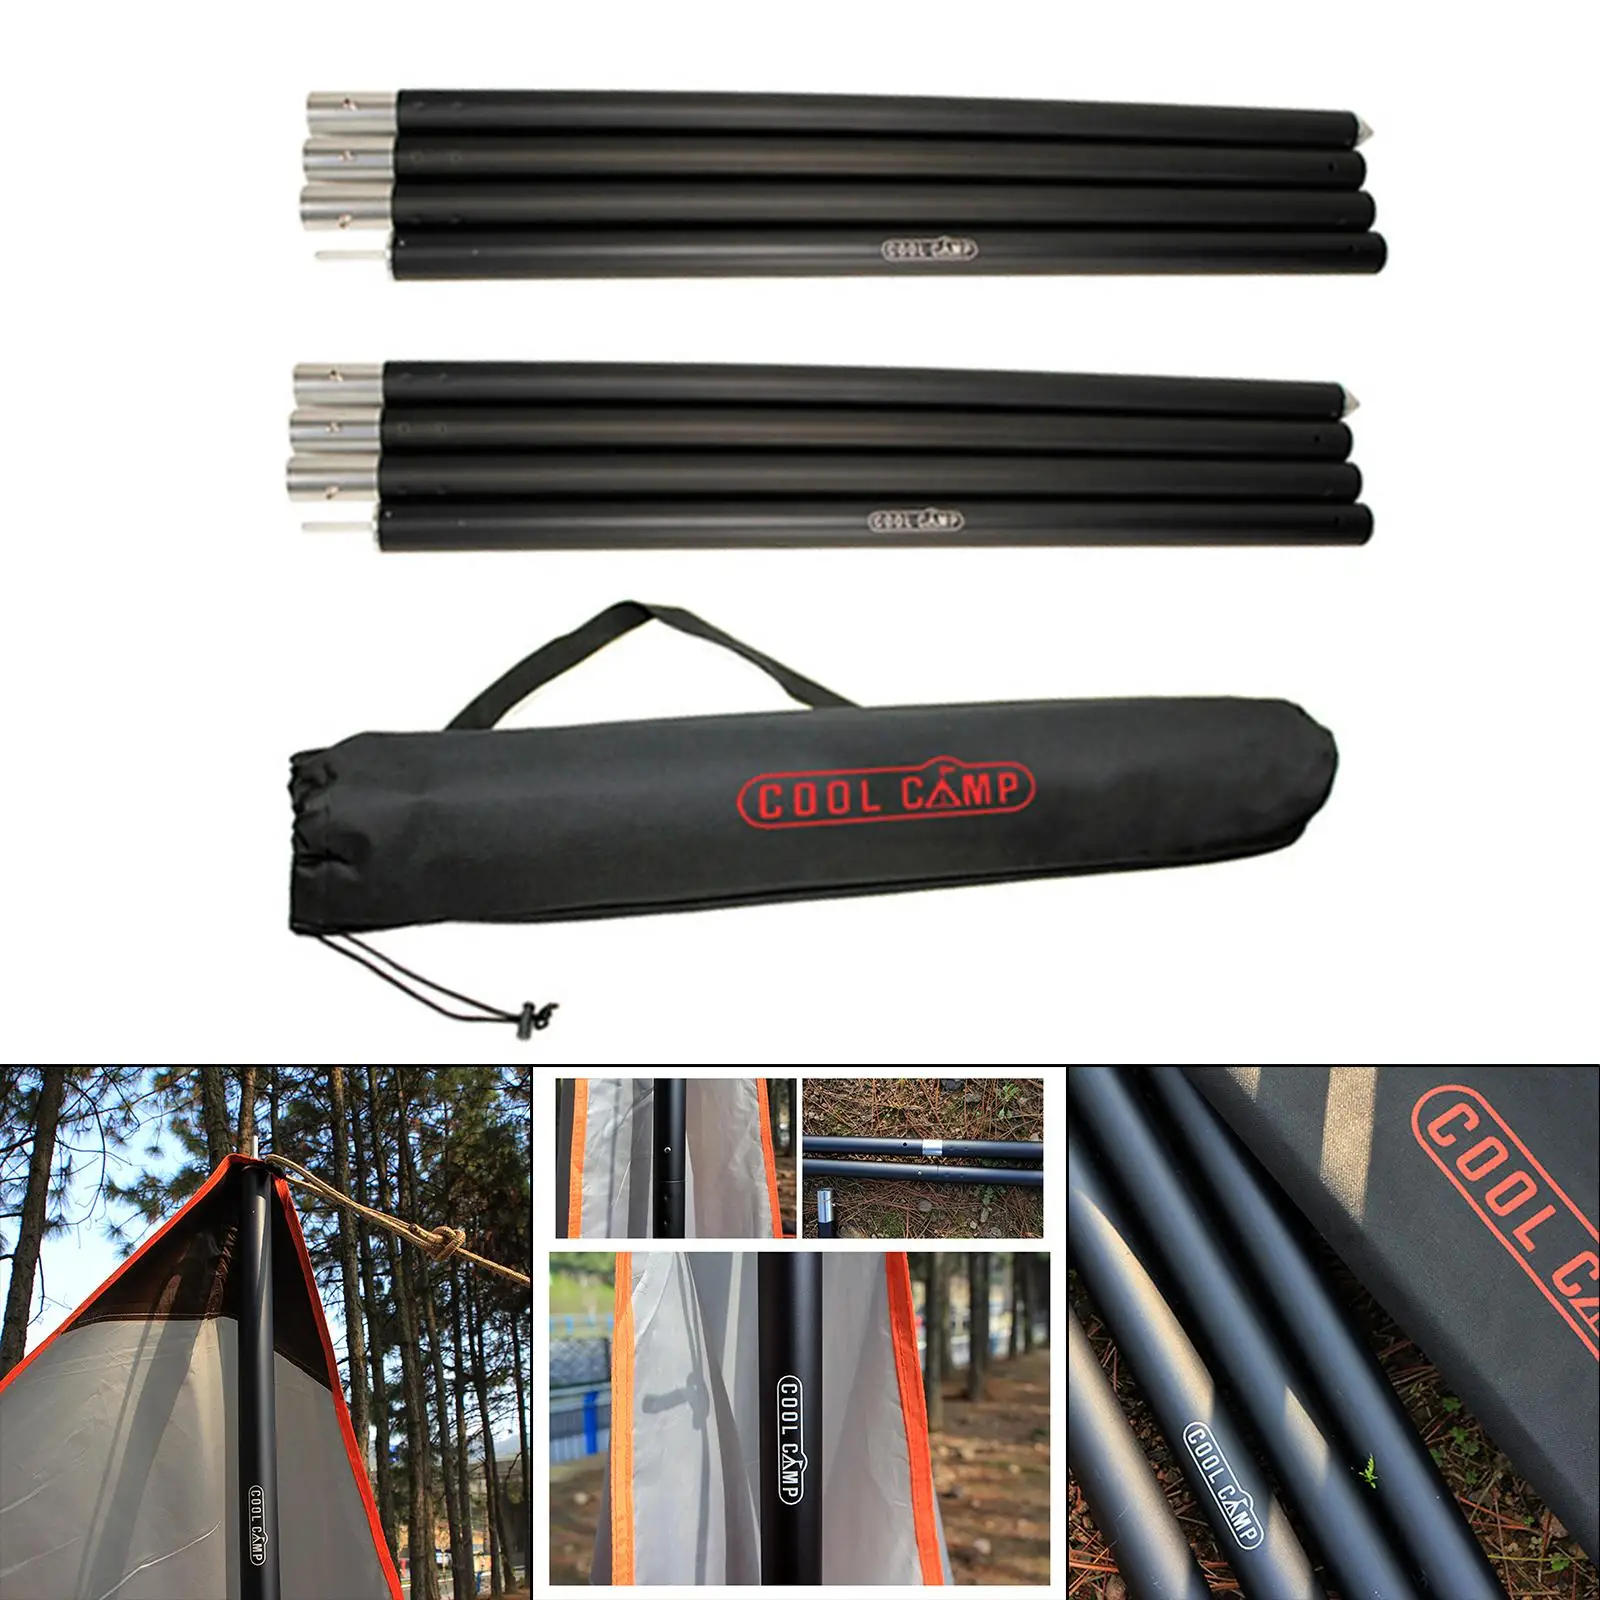 33mm Aluminum Tarp Poles Adjustable for Camping, Awnings,Shelters ,Made of High Strength Aluminum Alloy